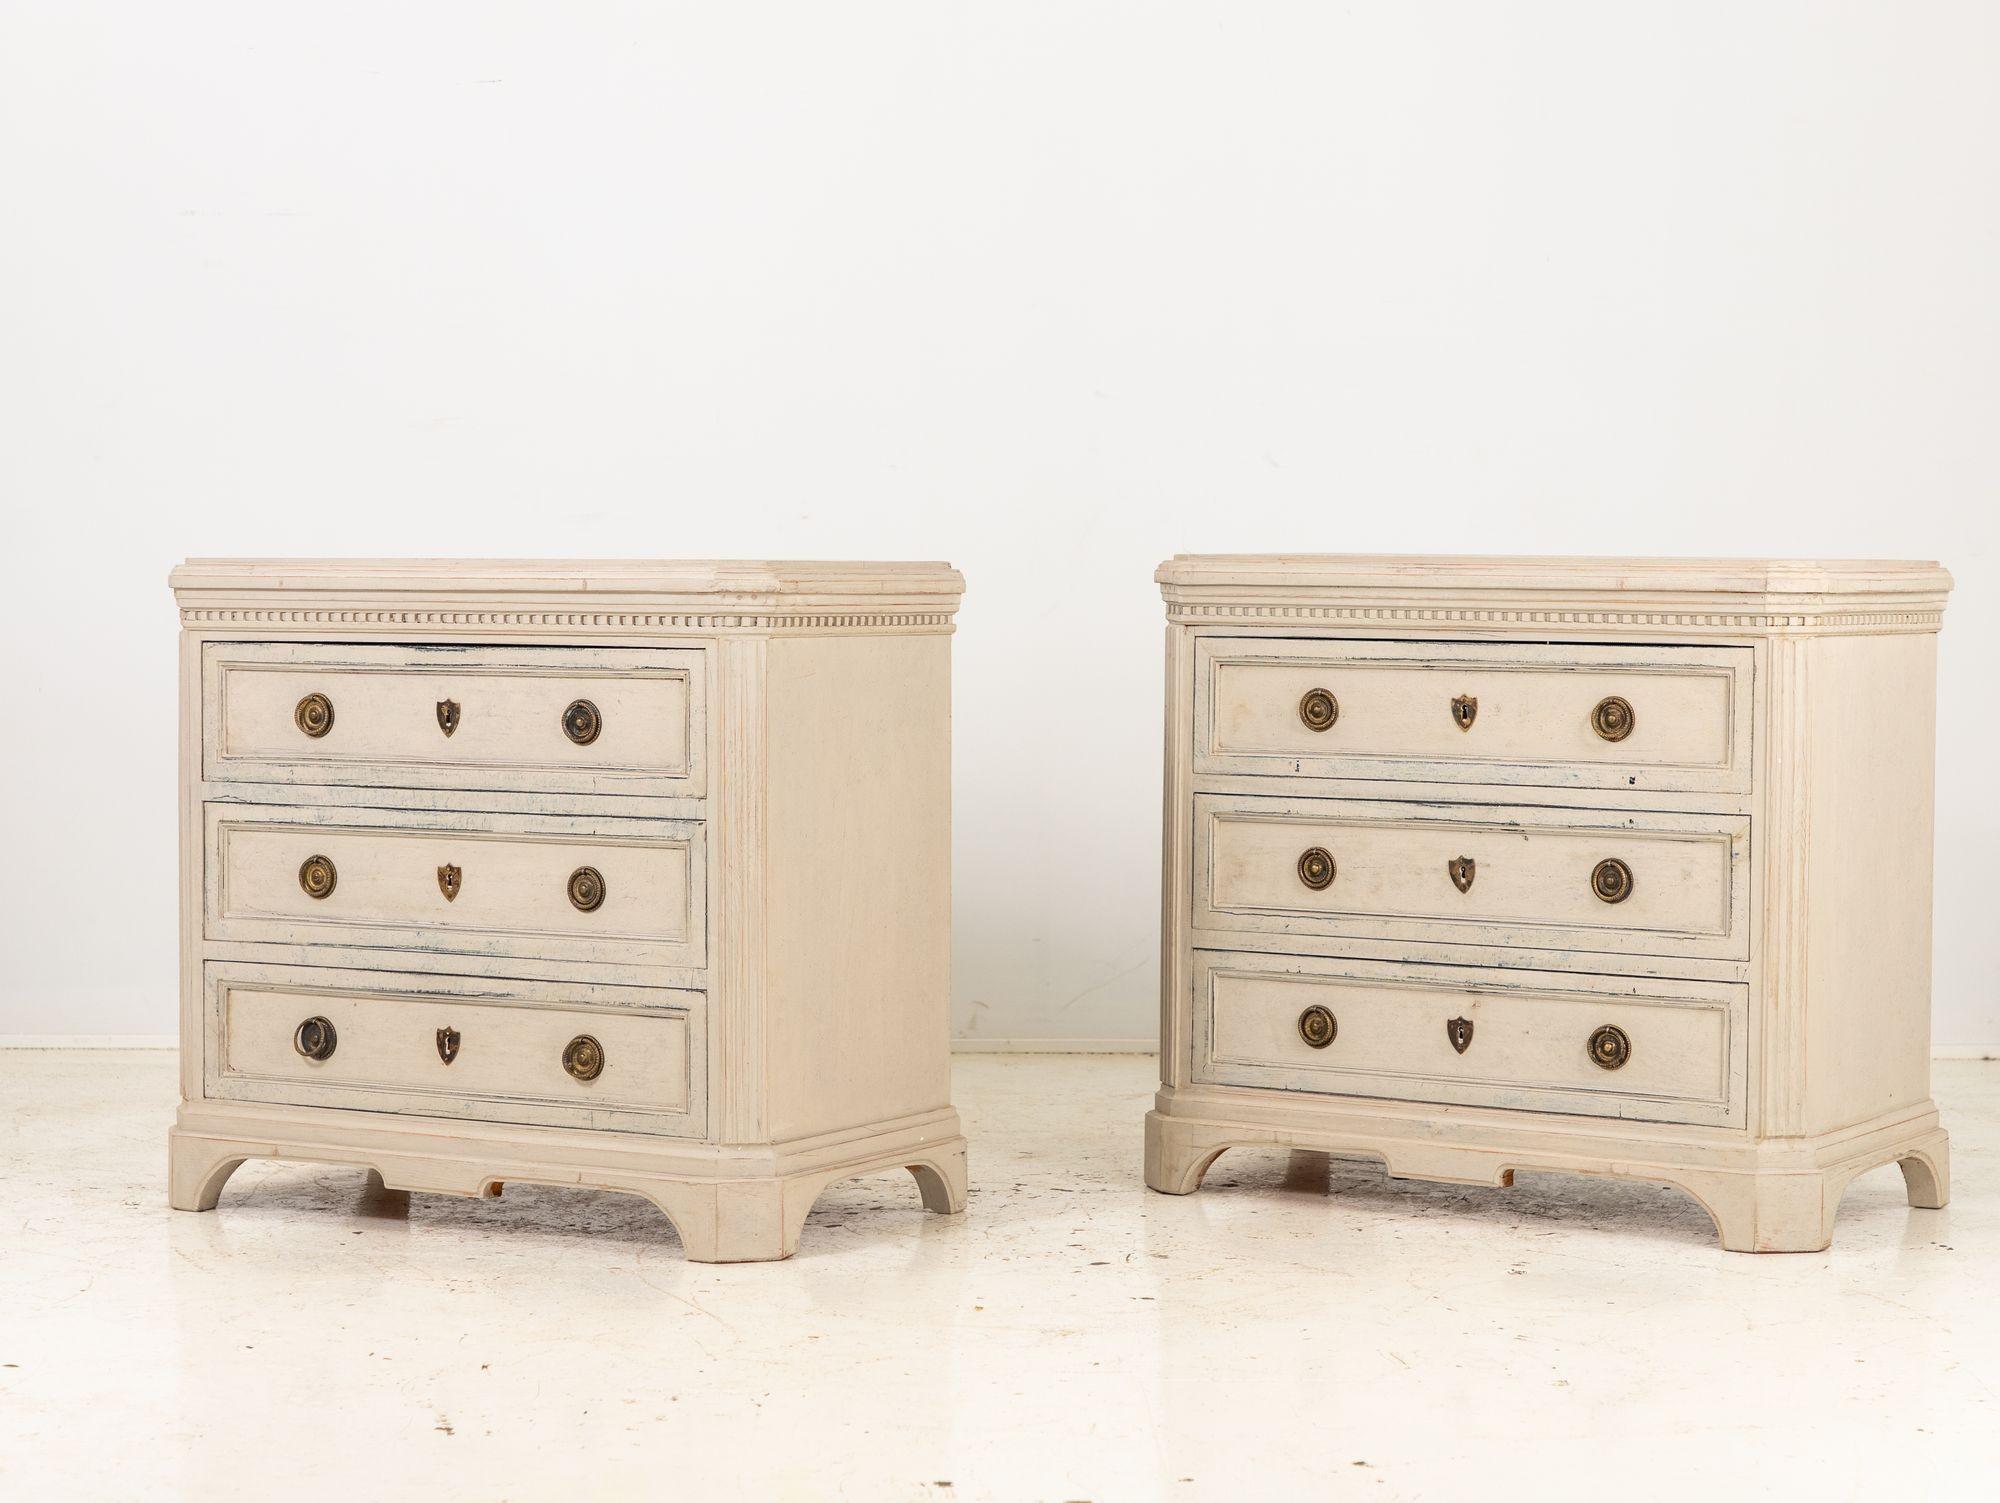 This pair of Gustavian style cream painted chests of drawers exudes timeless charm and sophistication. Each chest boasts three spacious drawers adorned with elegant brass ring pulls and escutcheons, adding a touch of opulence to their classical